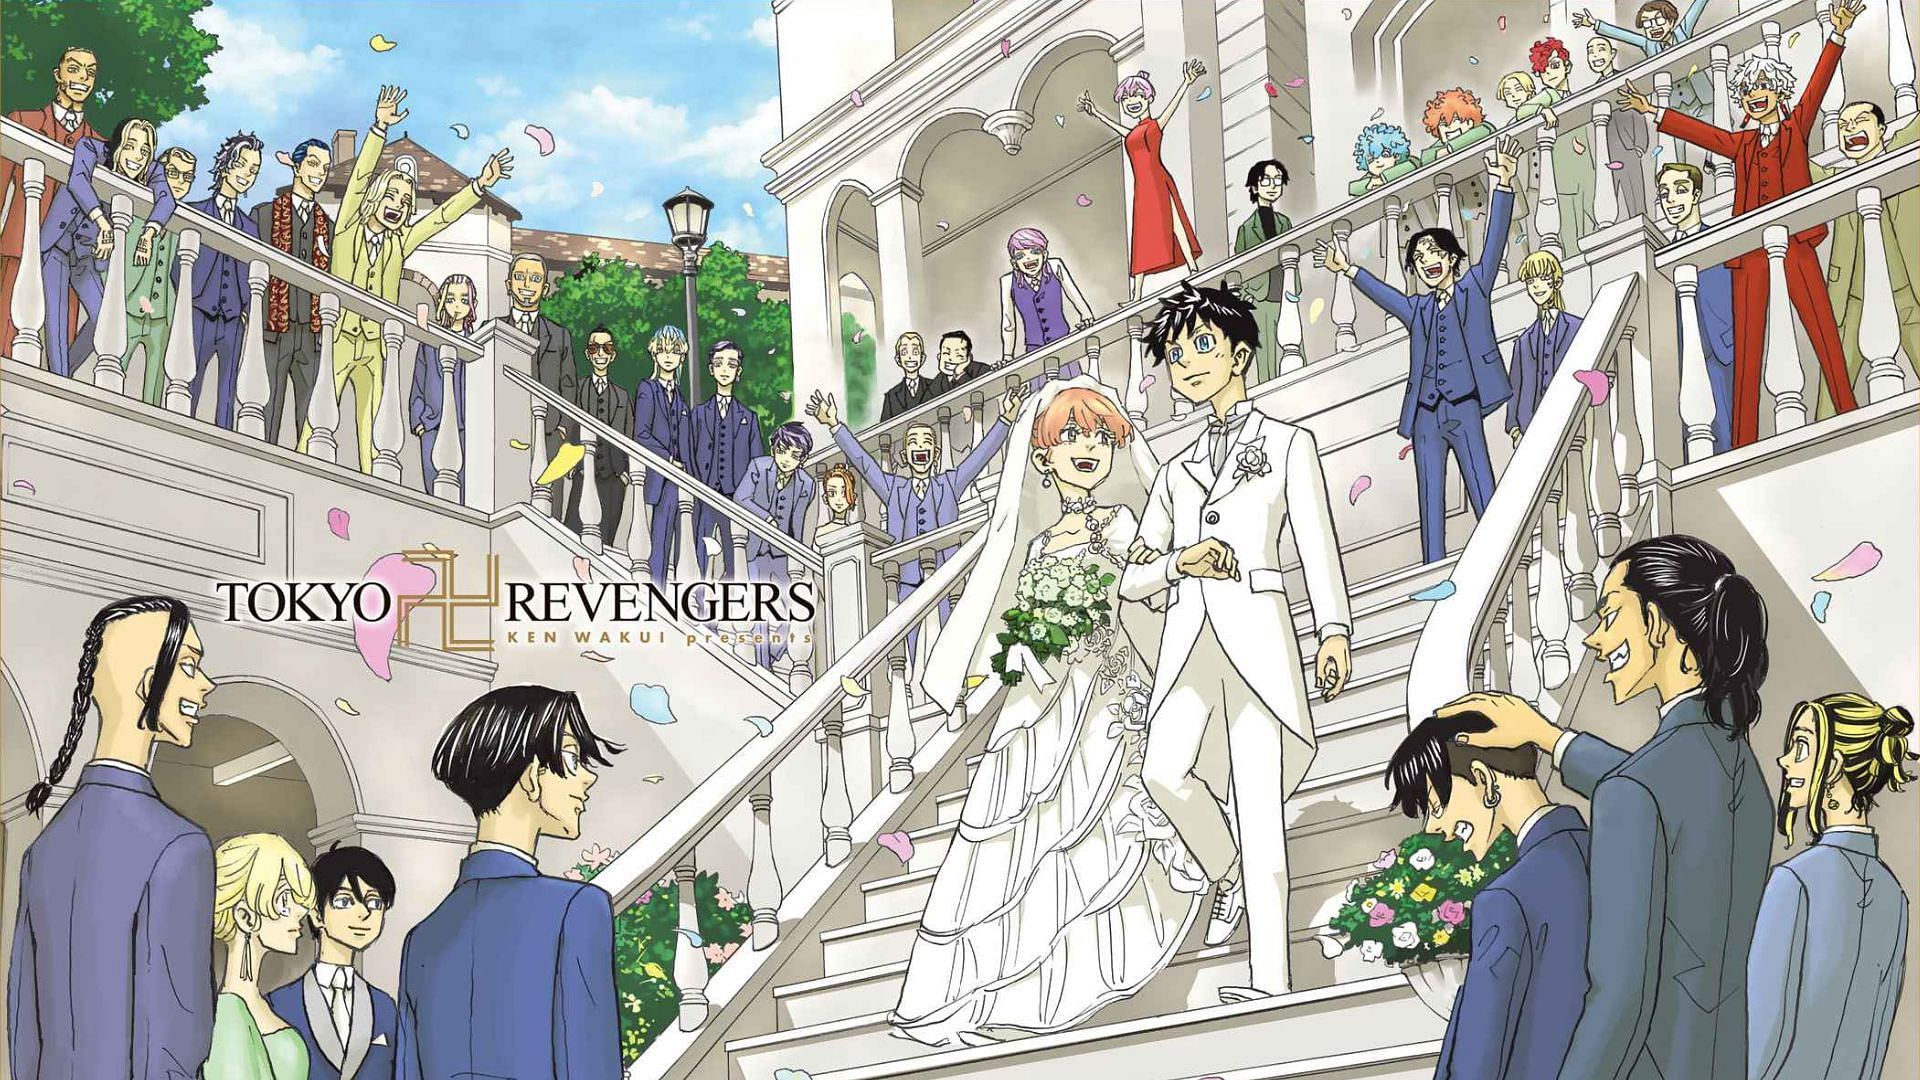 Tokyo Revengers Manga Is Sadly Coming To An End - NERD INITIATIVE